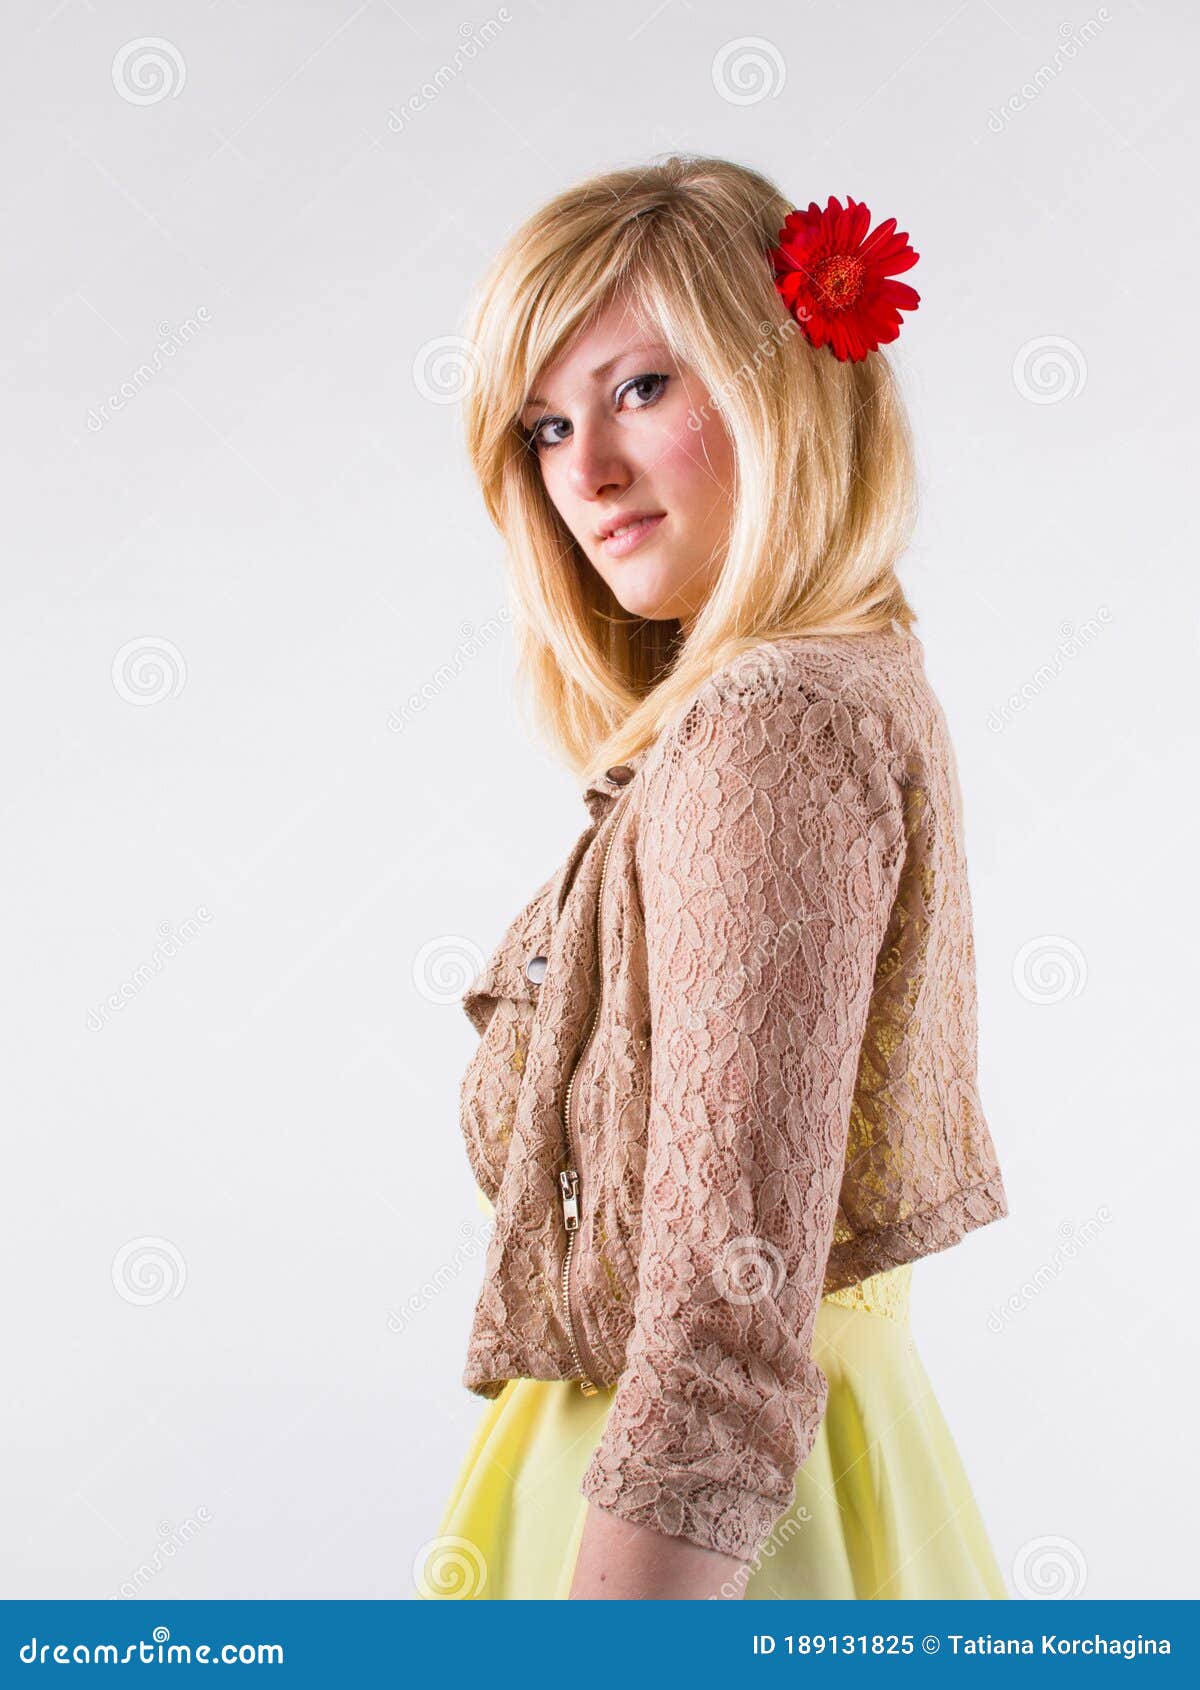 Young Blonde with a Red Gerbera Flower in Her Straight Hair, Standing in  Profile and Looking at Camera Stock Image - Image of blue, happy: 189131825